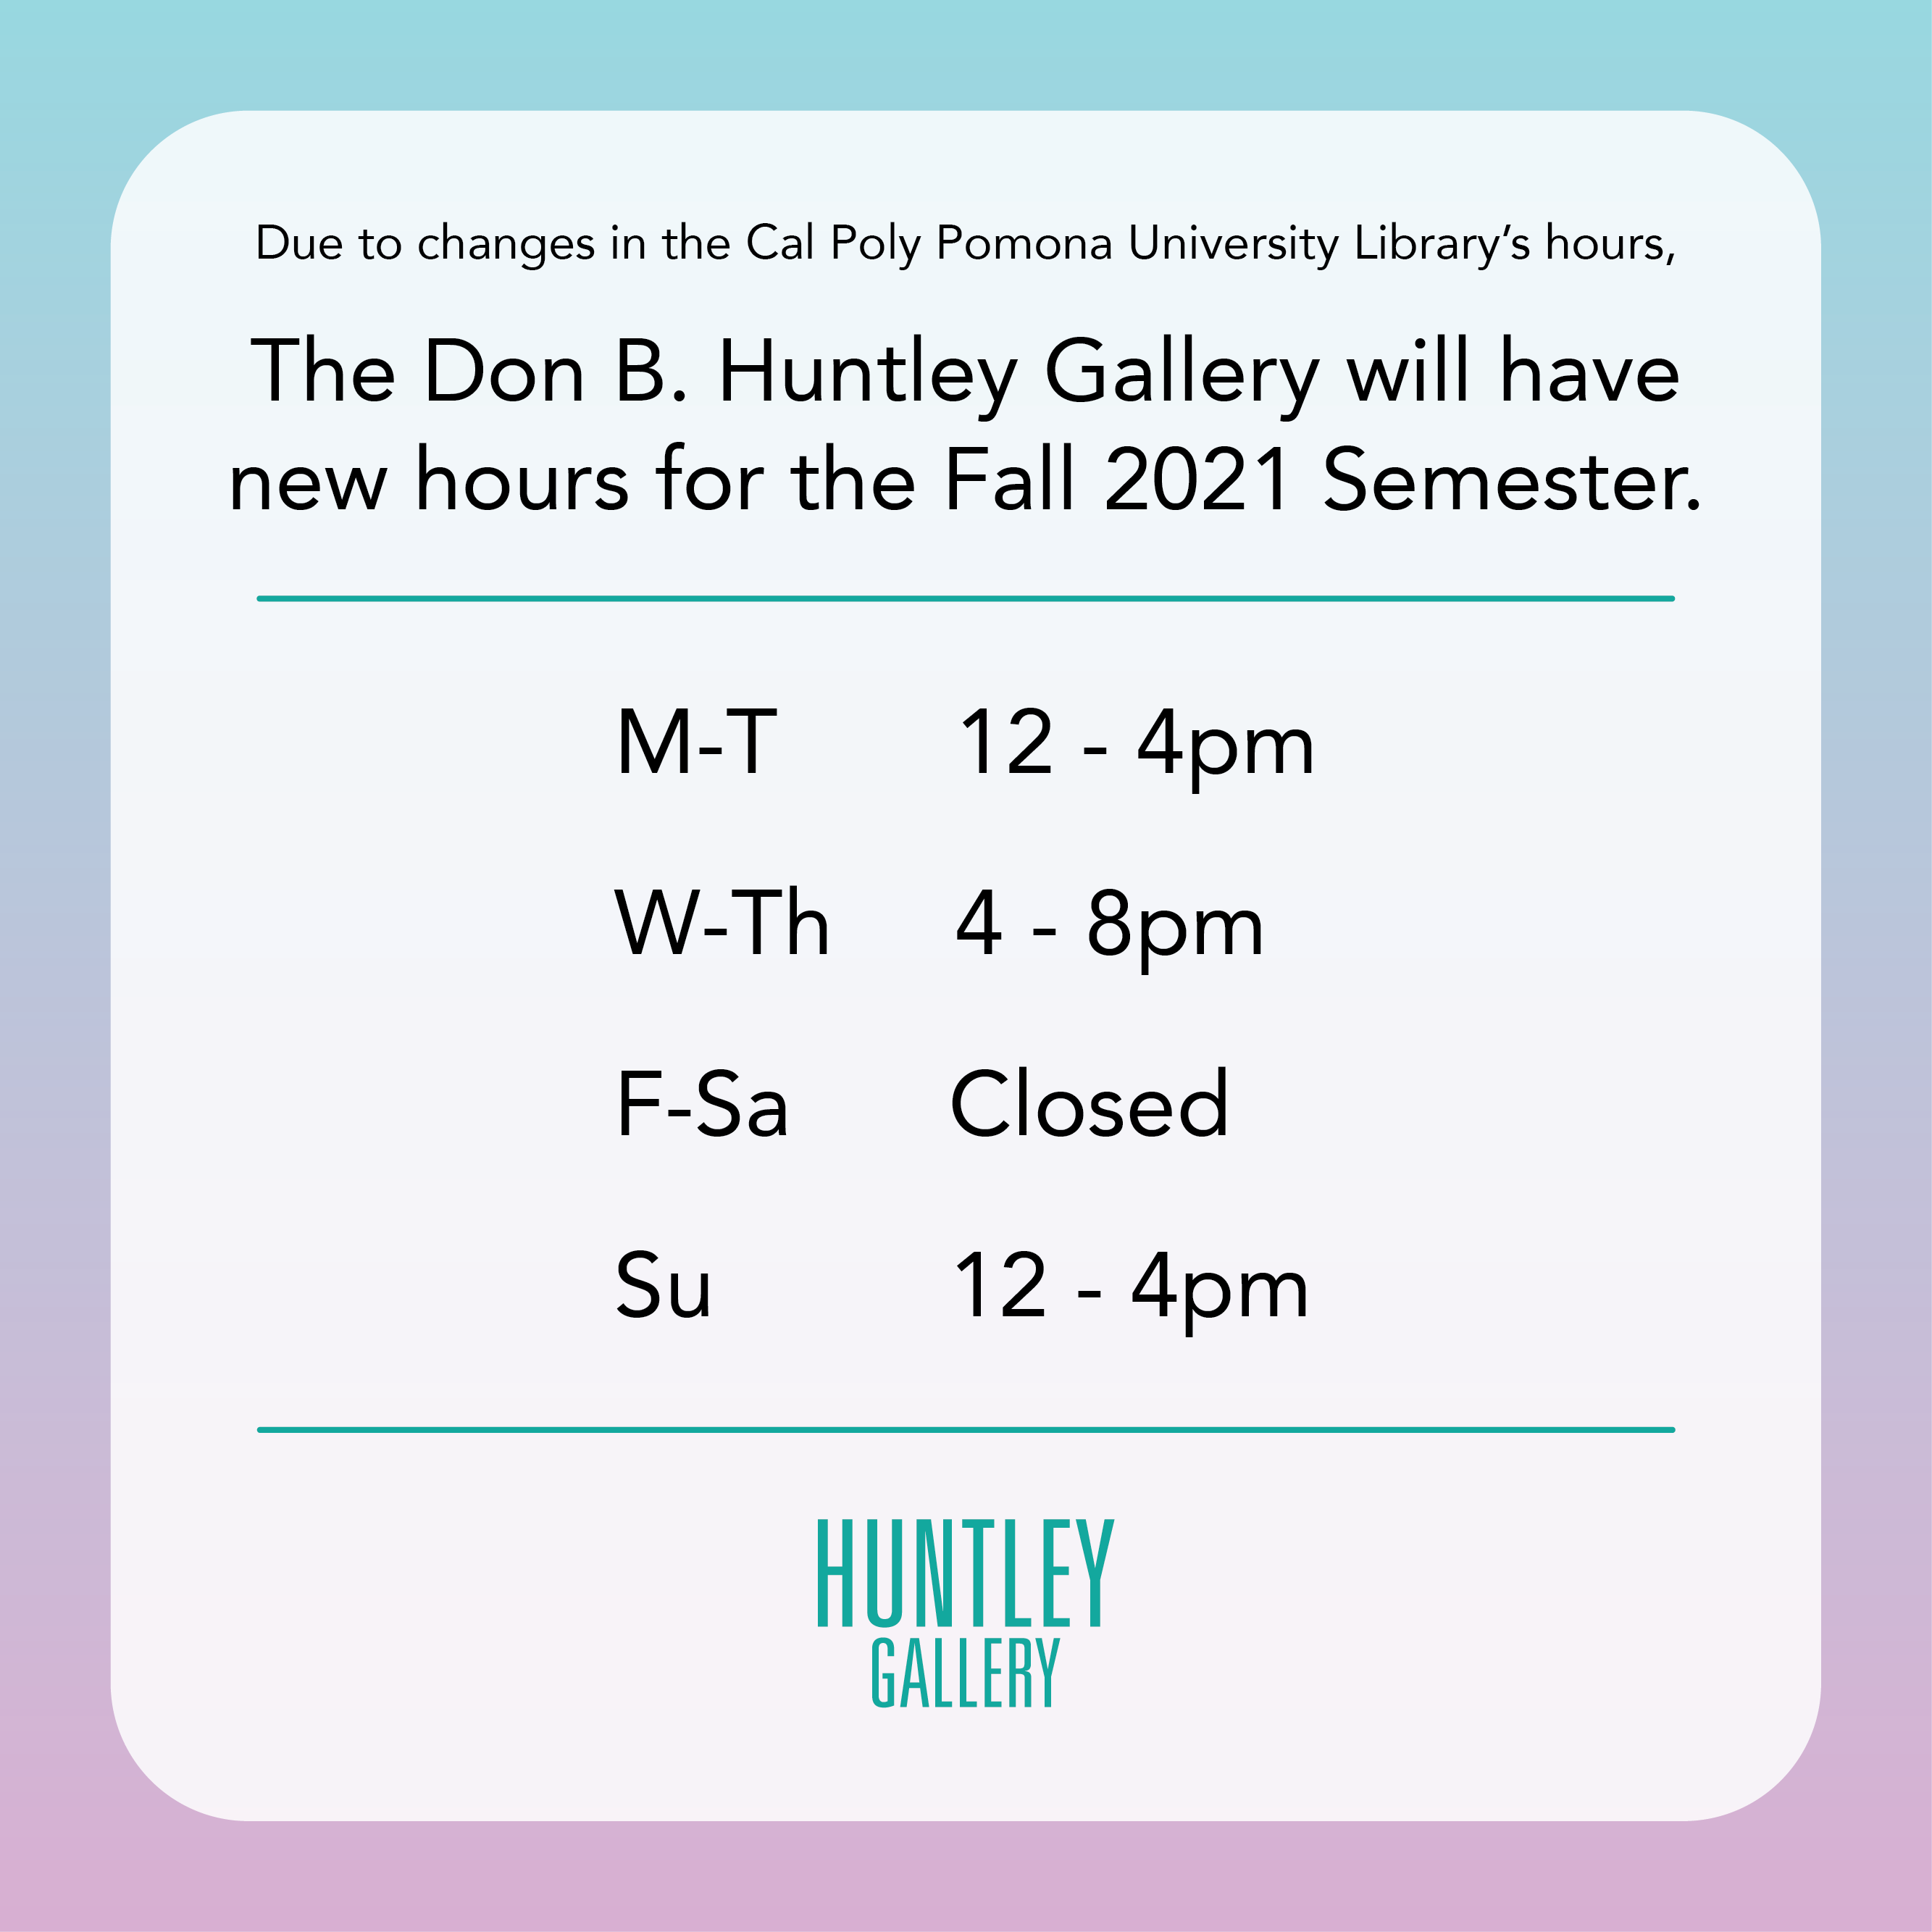 Due to changes in the Cal Poly Pomona University Library Hours, the Don. B Huntley will hav new hours for the Fall 2021 Semester Monday and Tuesday: Noon - 4 p.m. Wednesday and Thursday: 4 p.m. - 8 p.m.  Friday and Saturday: CLOSED Sunday: Noon - 4 p.m.